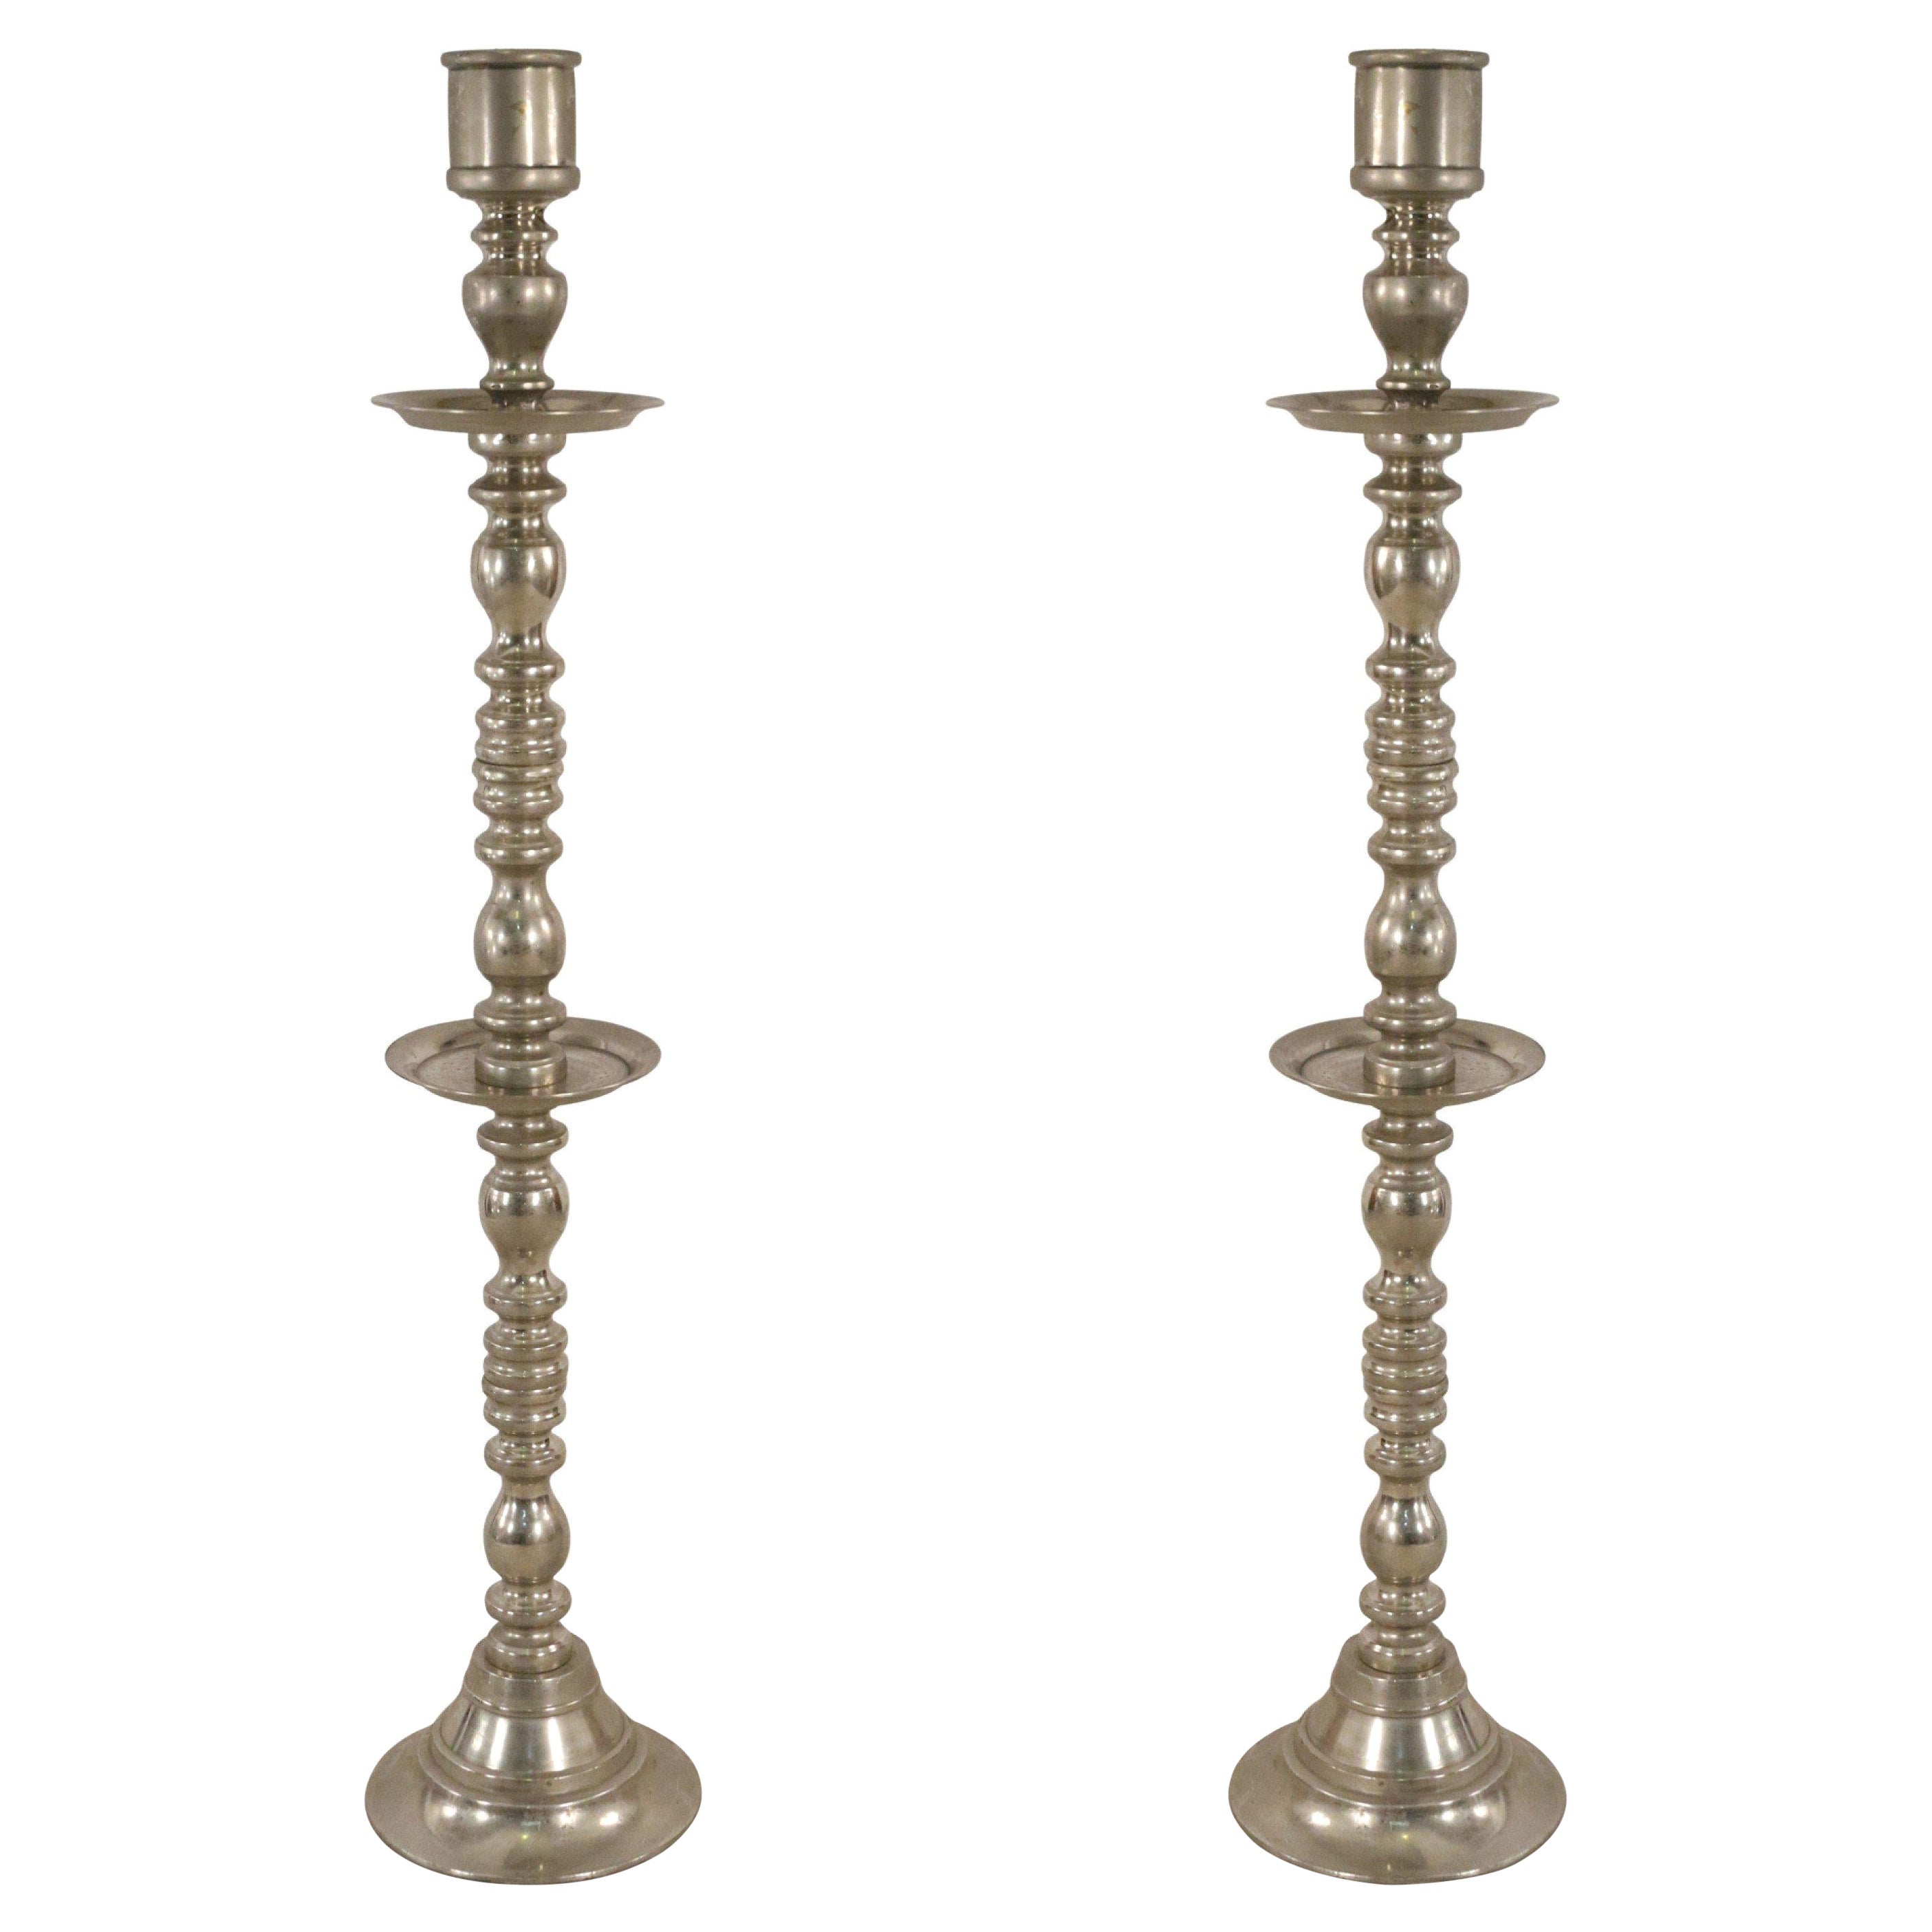 Pair of Mid-Century Silver Metal Turned Design Floor Torchiere/Candle Holders